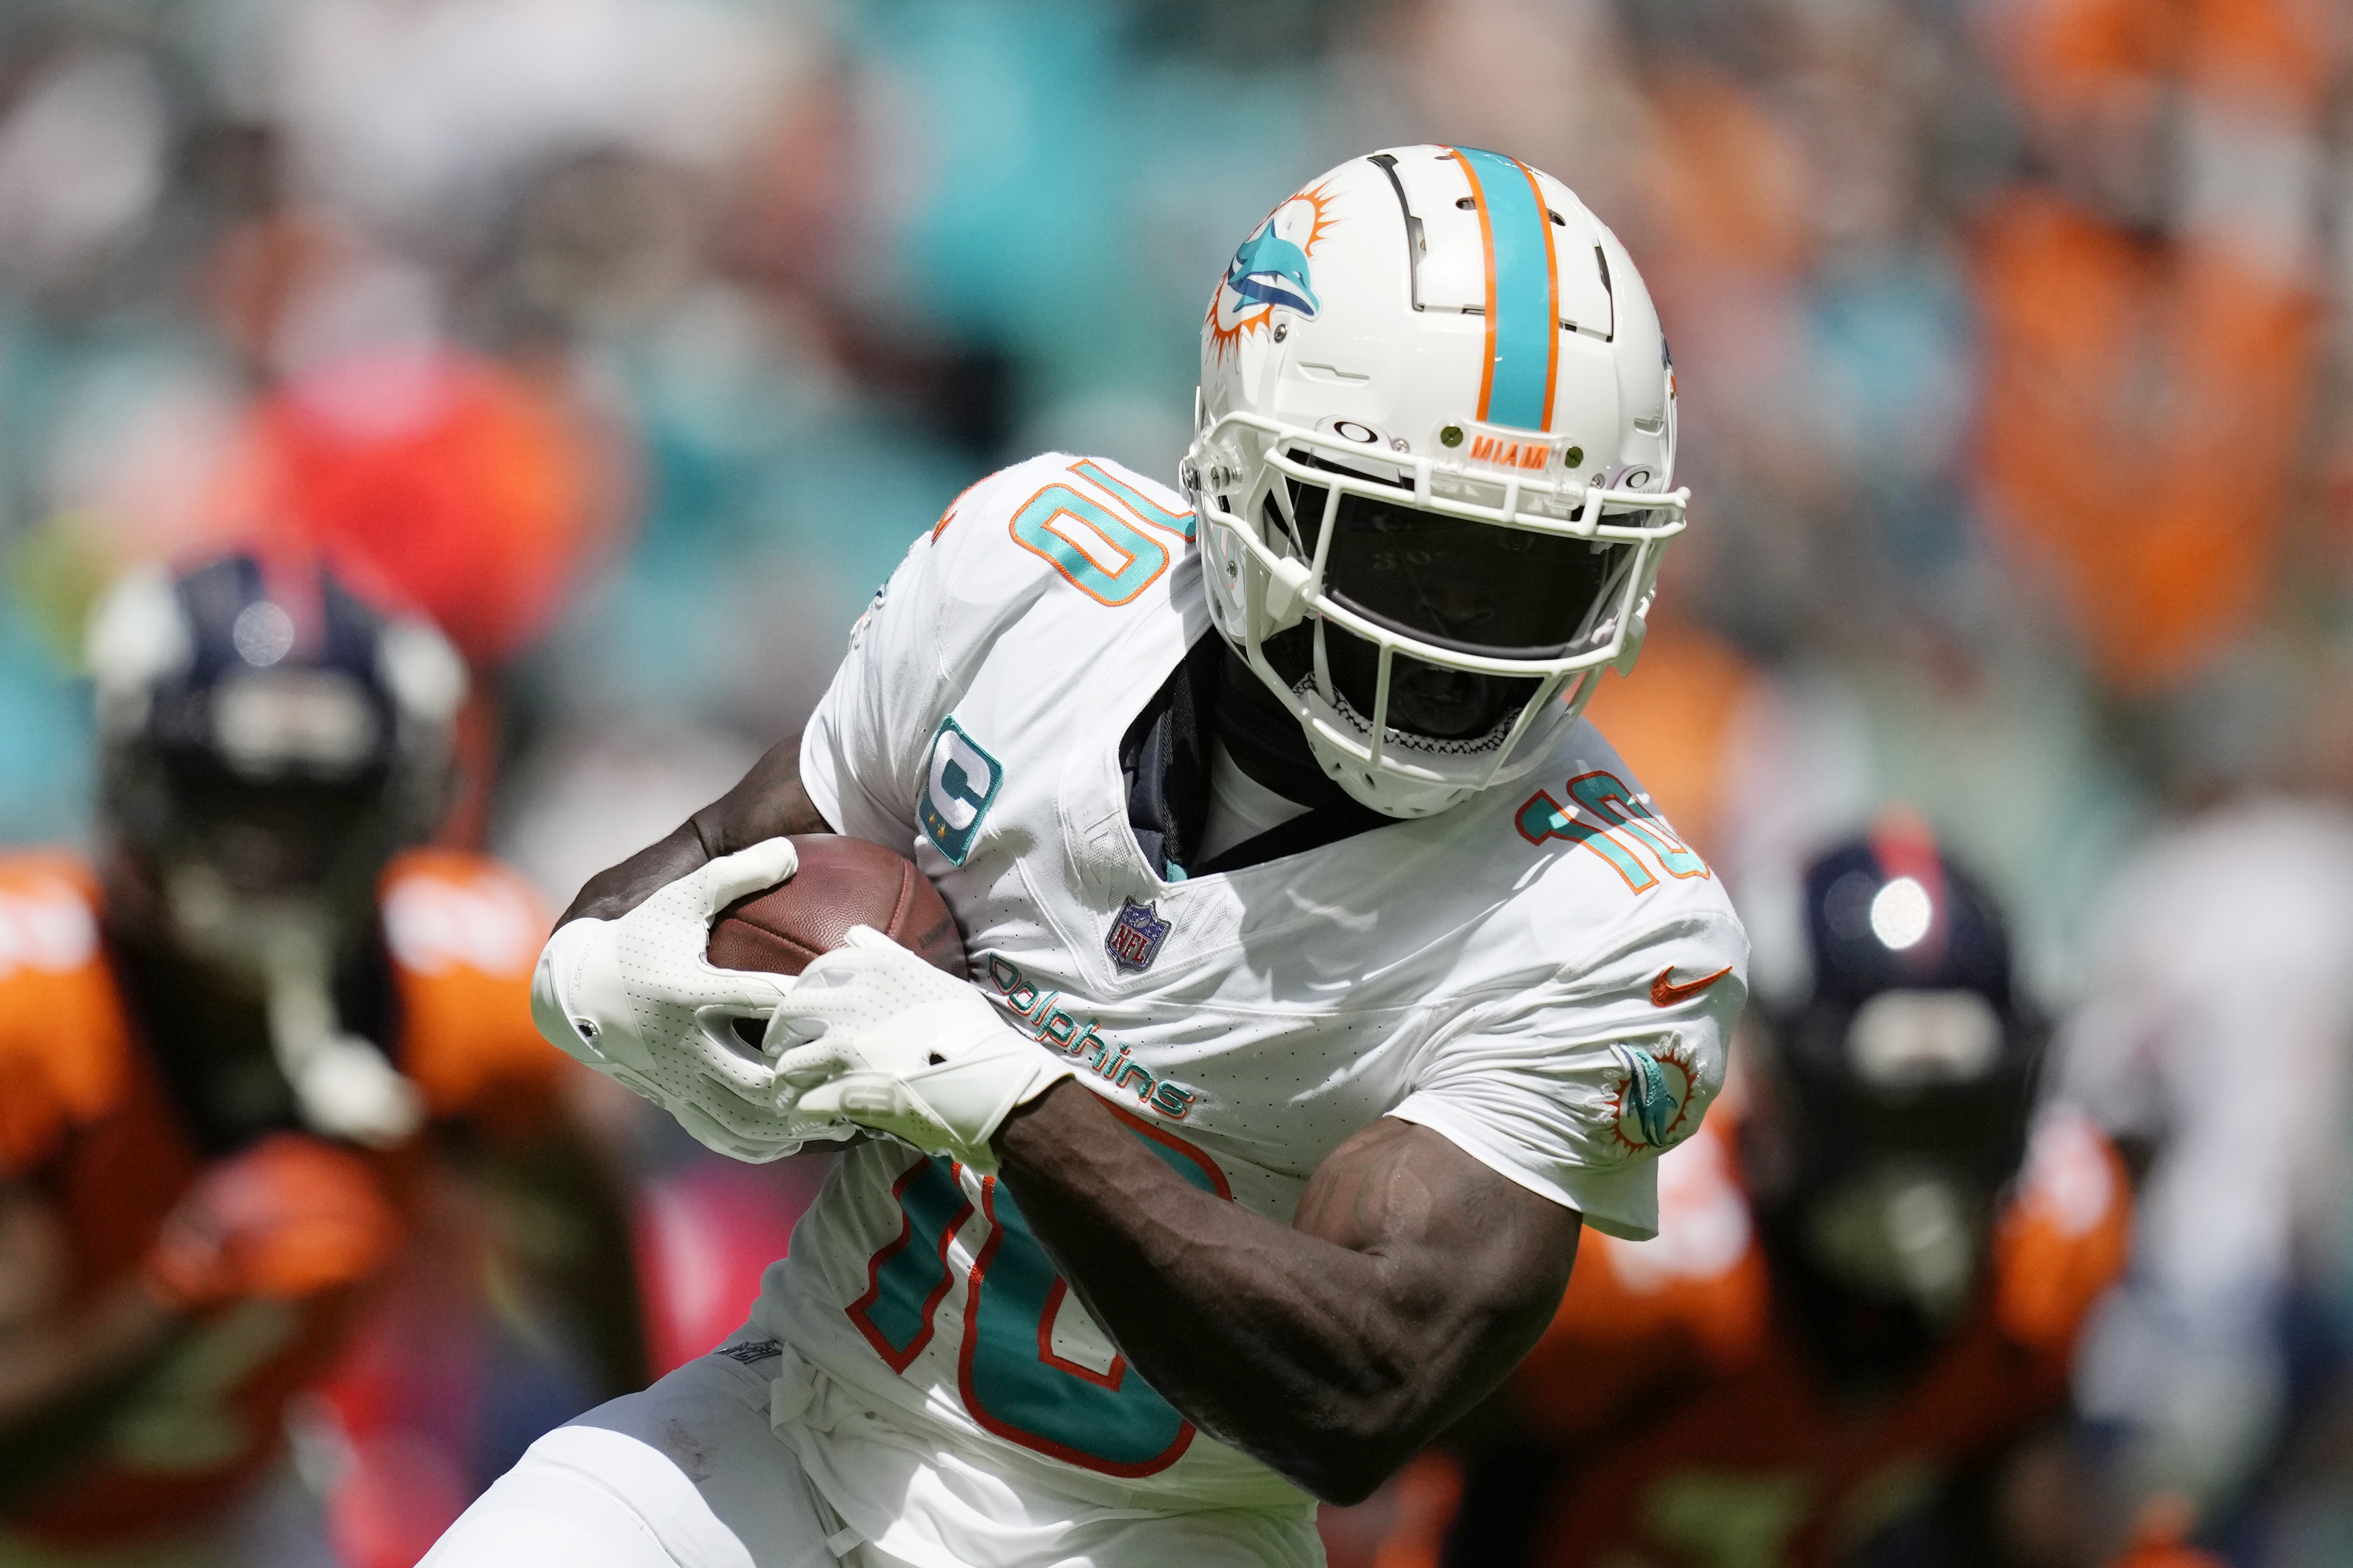 Dolphins score 70 points, the most in the NFL since 1966, vs. Broncos 